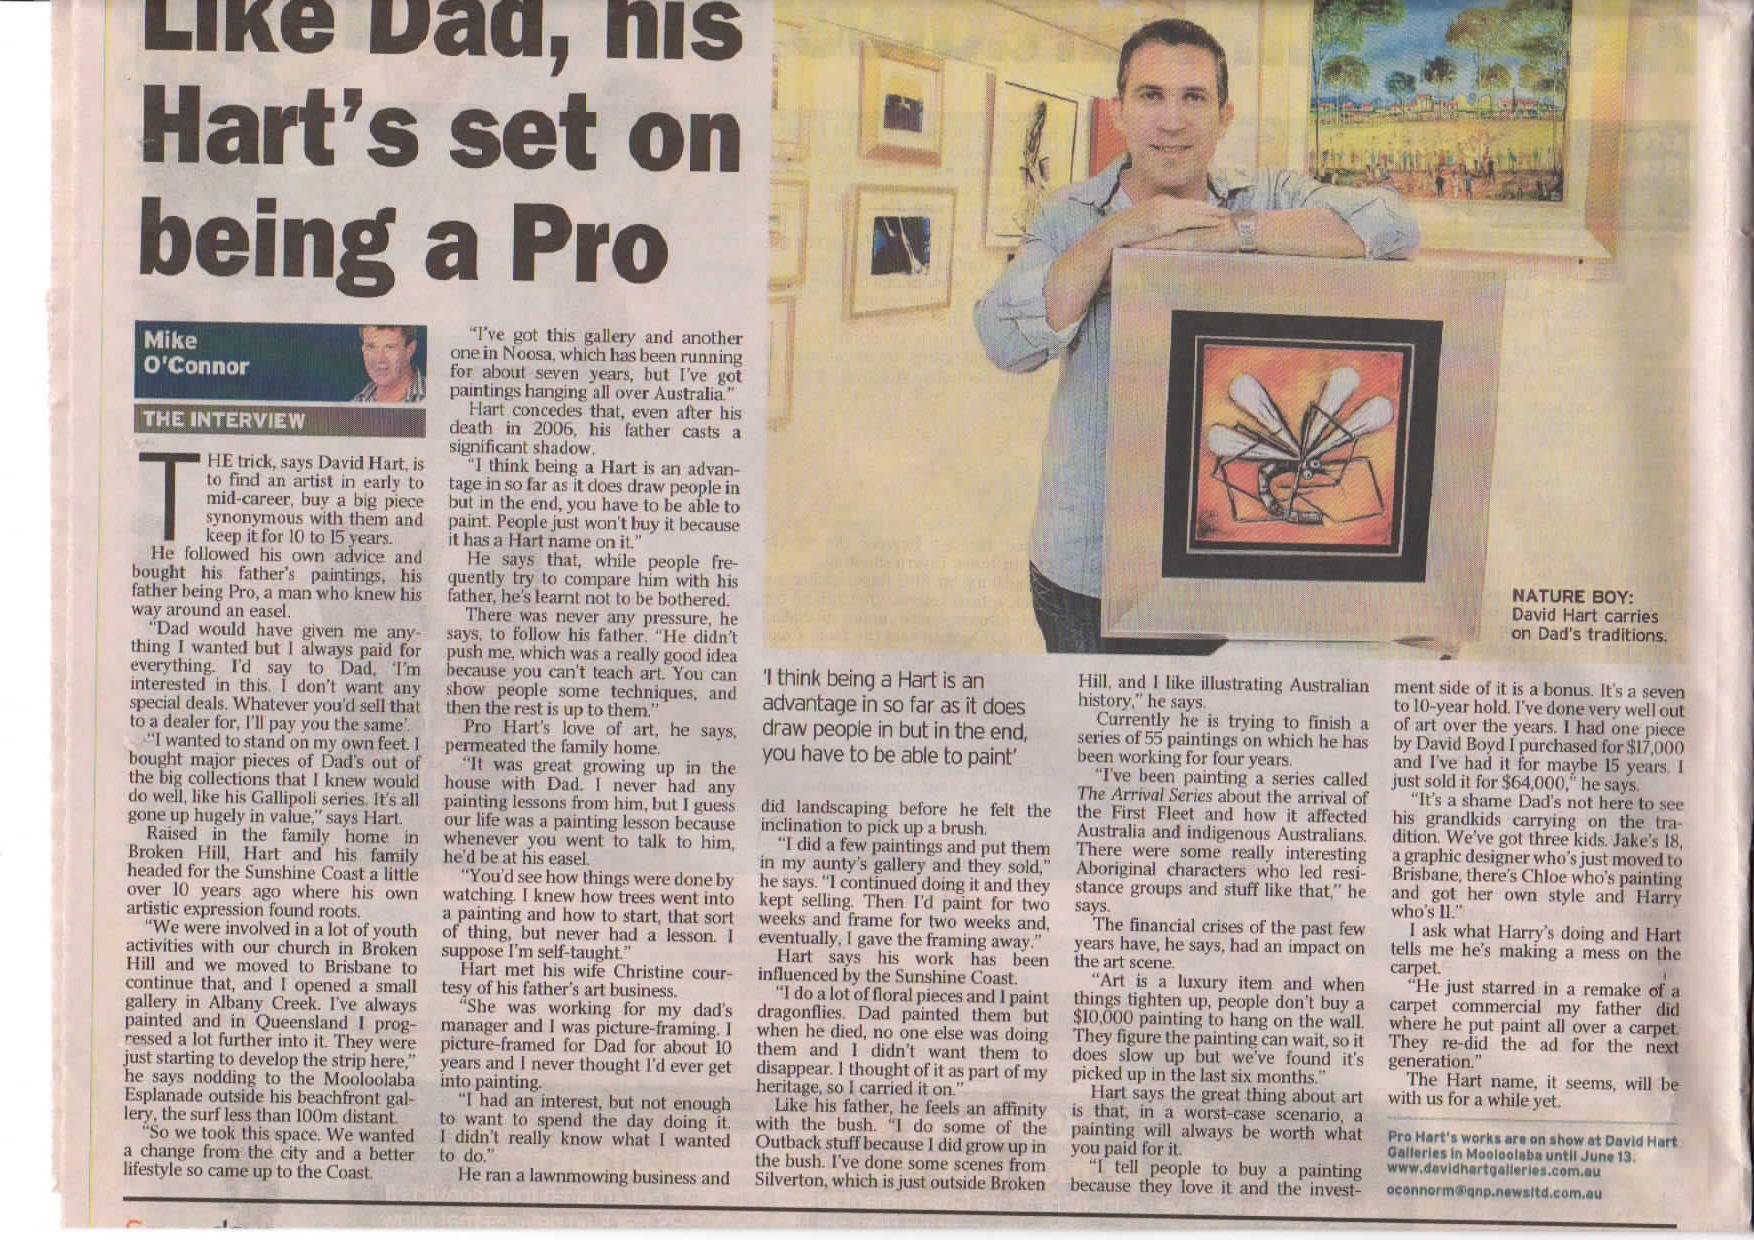 2011 June 4 Courier Mail